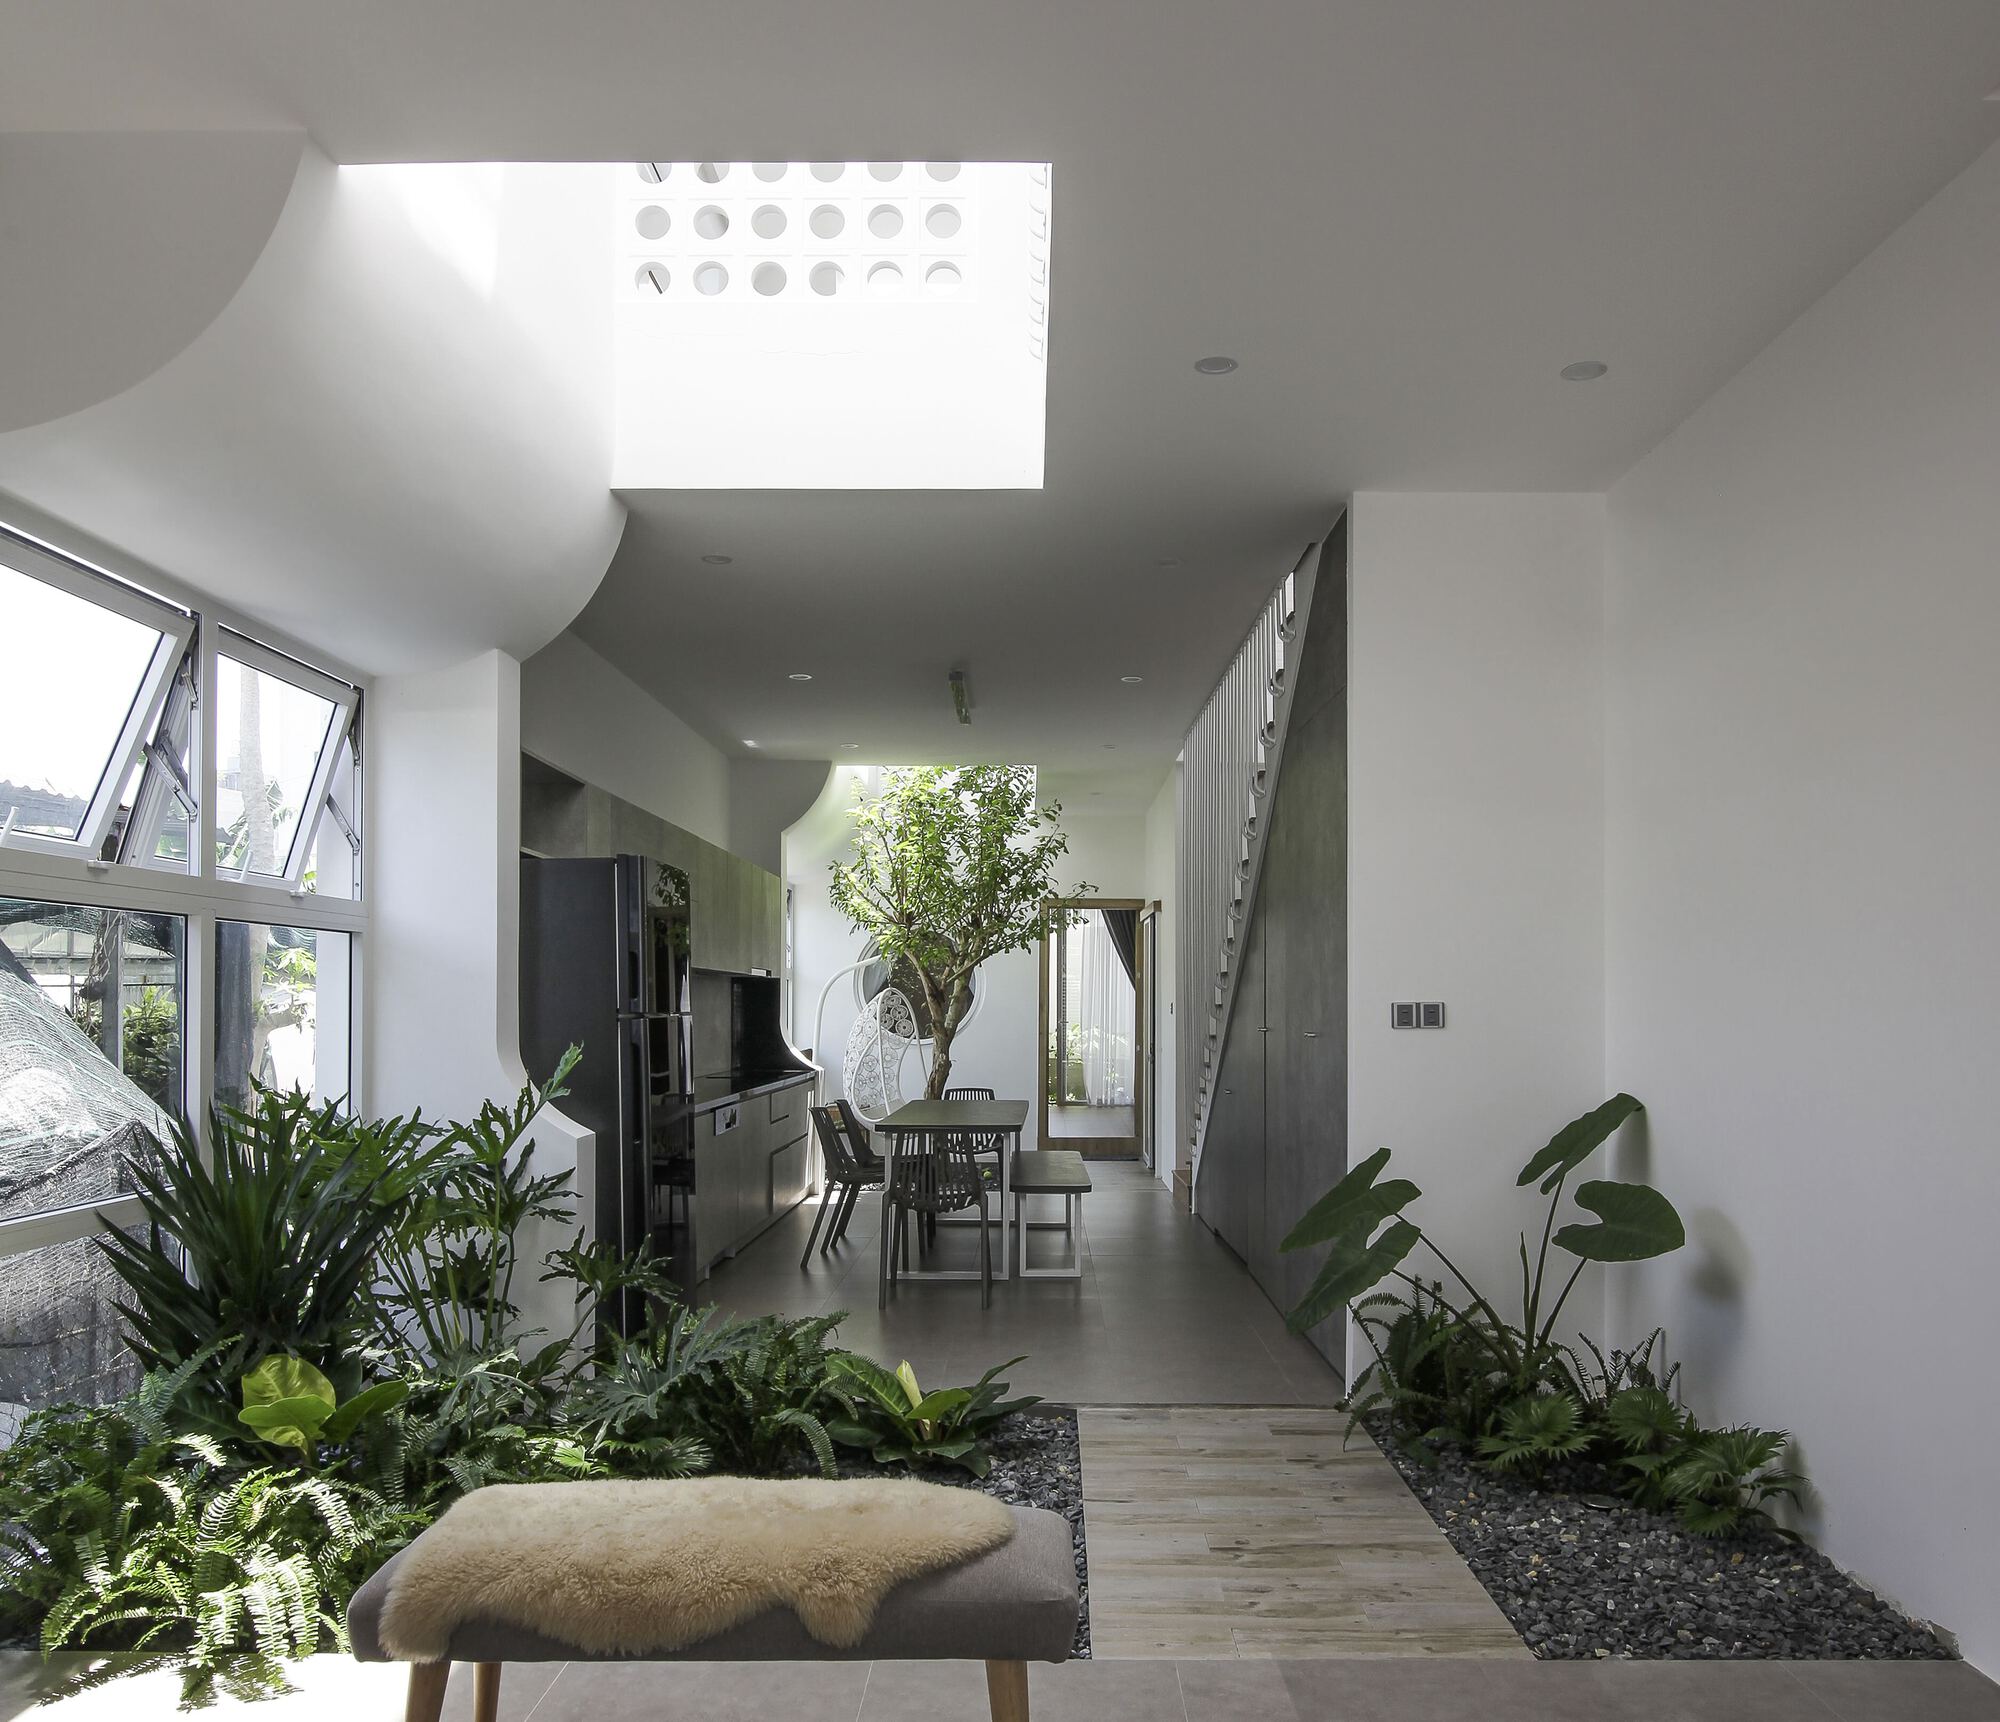 The Role of Inner Garden in Minimalist Housing in a High ...